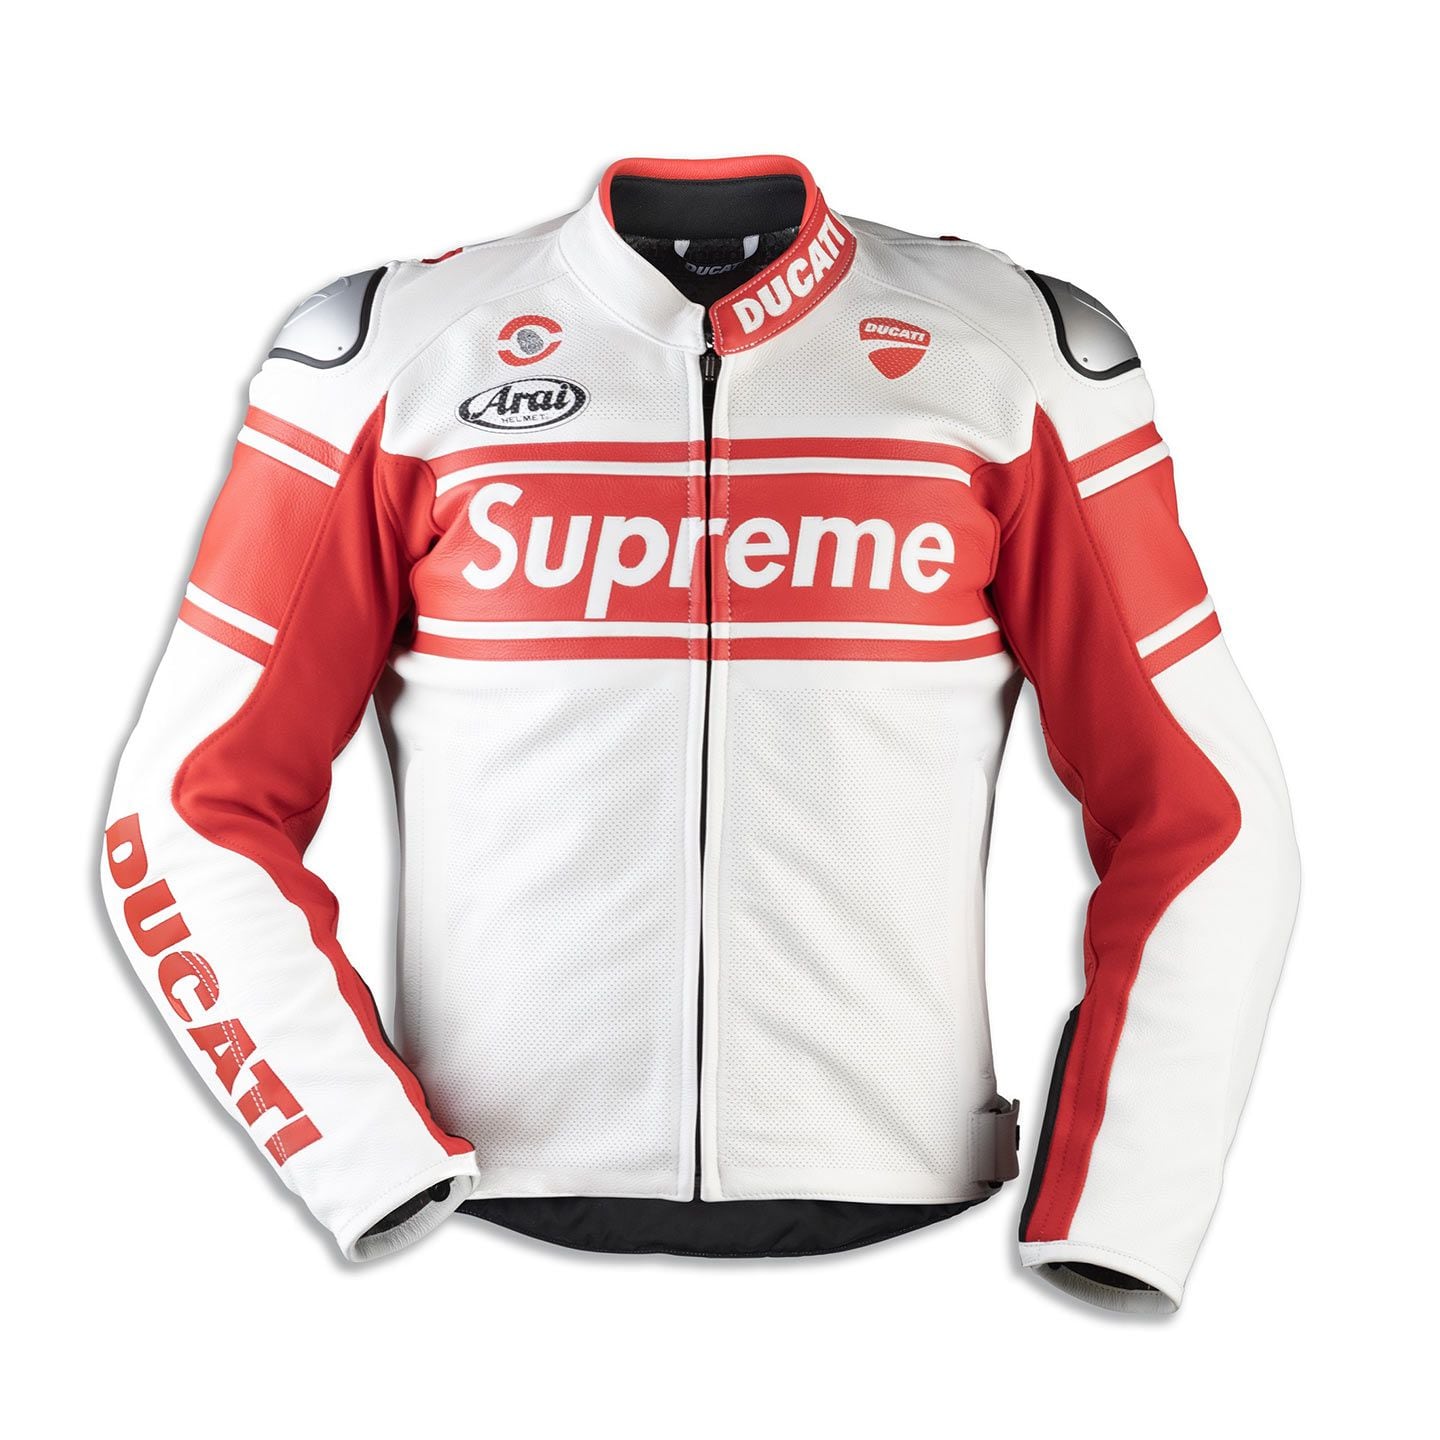 Ducati will also be offering coordinated racing apparel produced by Dainese as part of the limited collection.